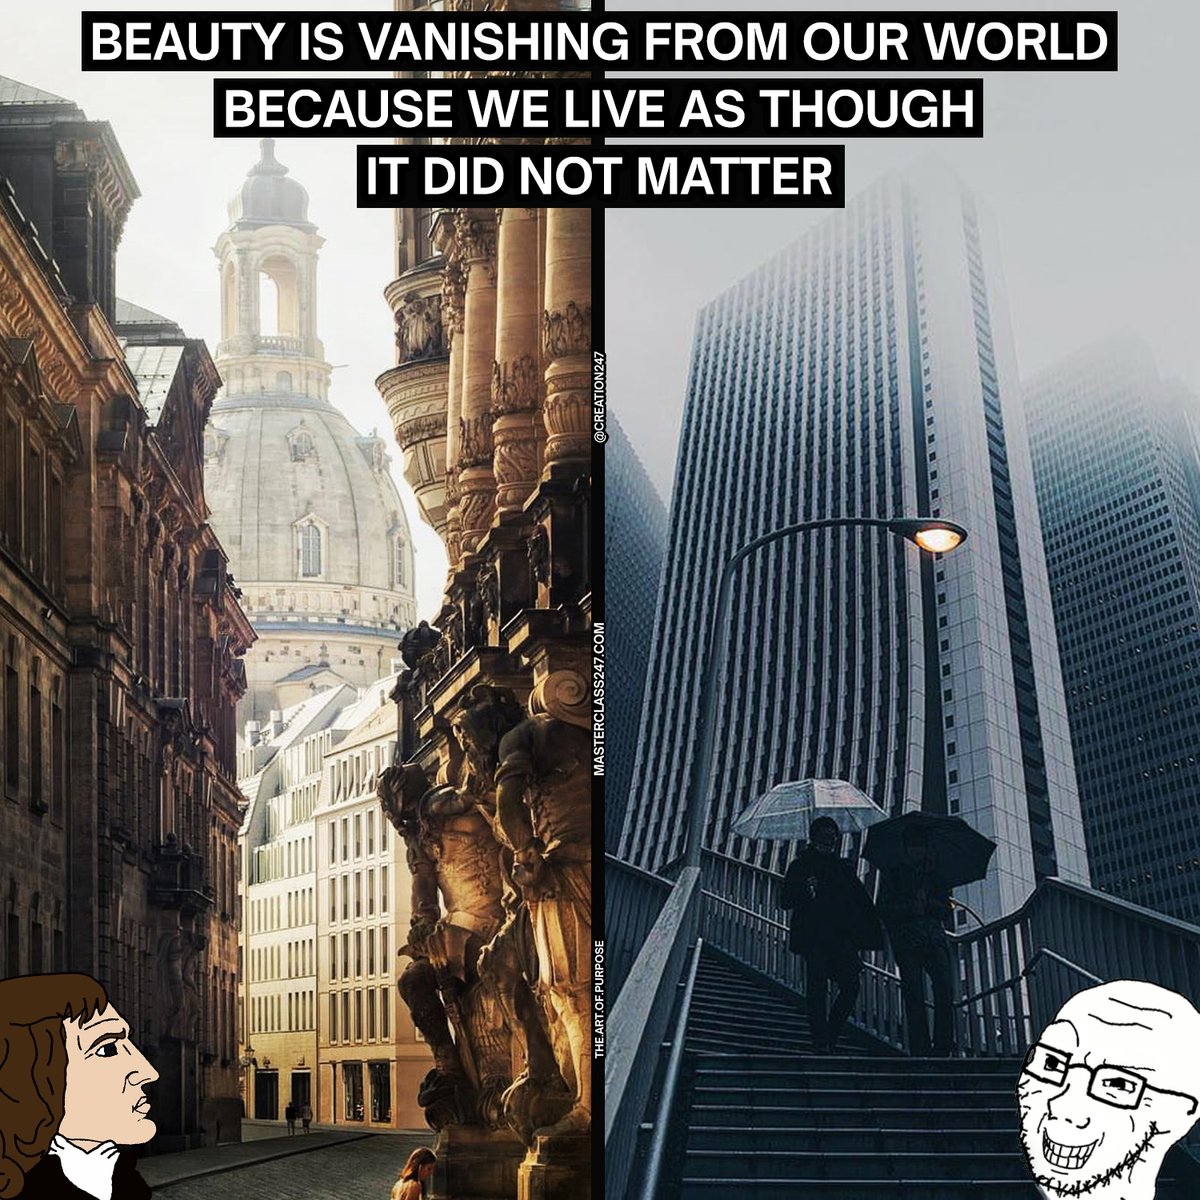 Why is beauty vanishing from our world?